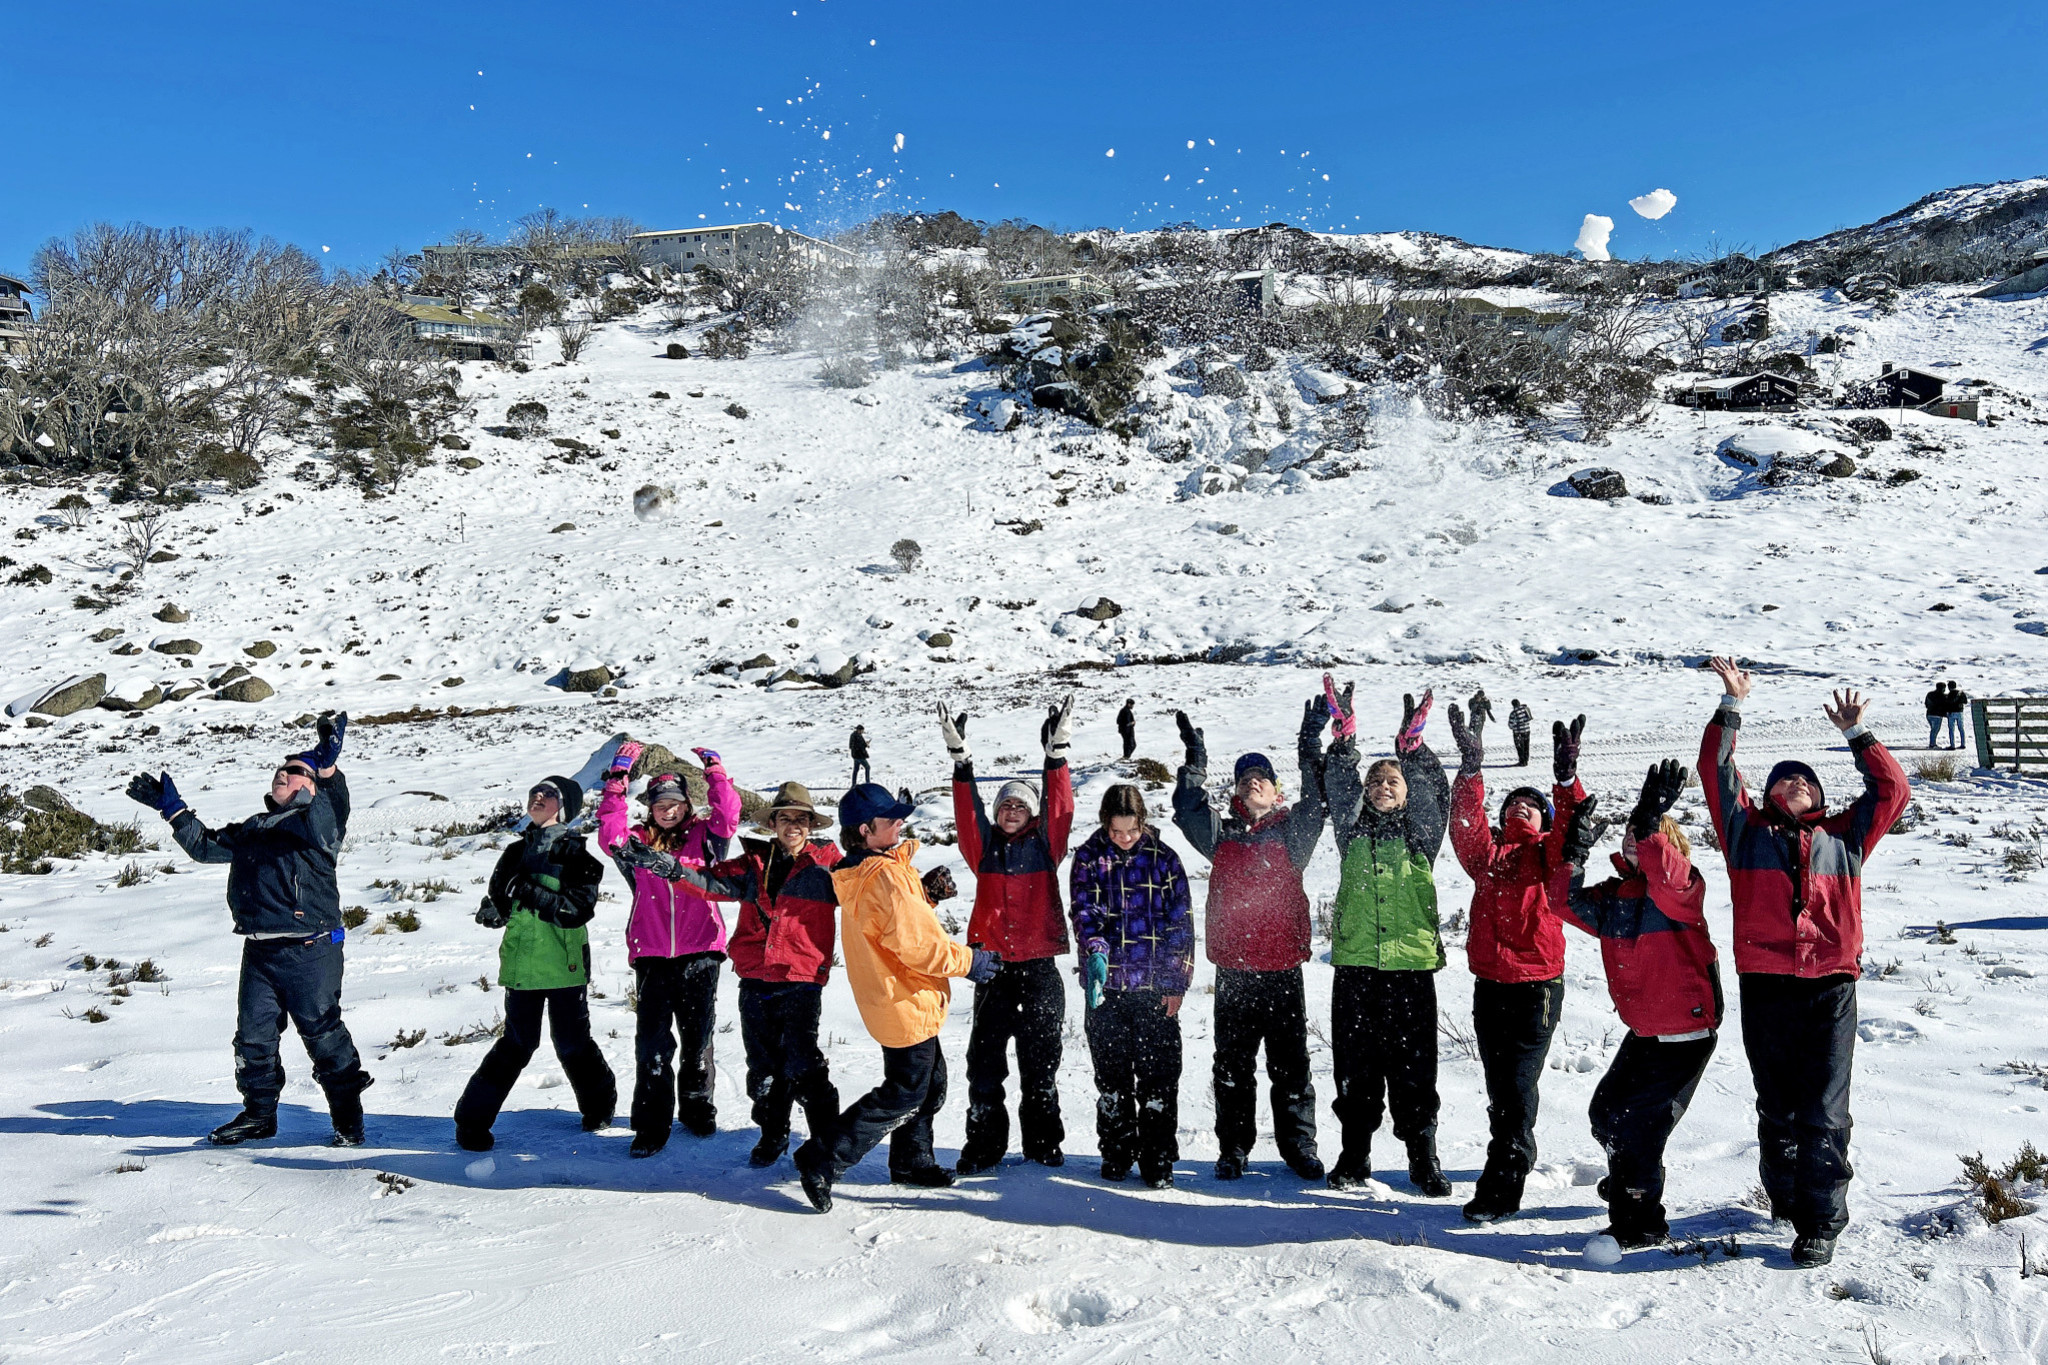 The Mount Isa School of the Air Year 6 students had a blast at Perisher last week. For many it was their first time seeing snow!